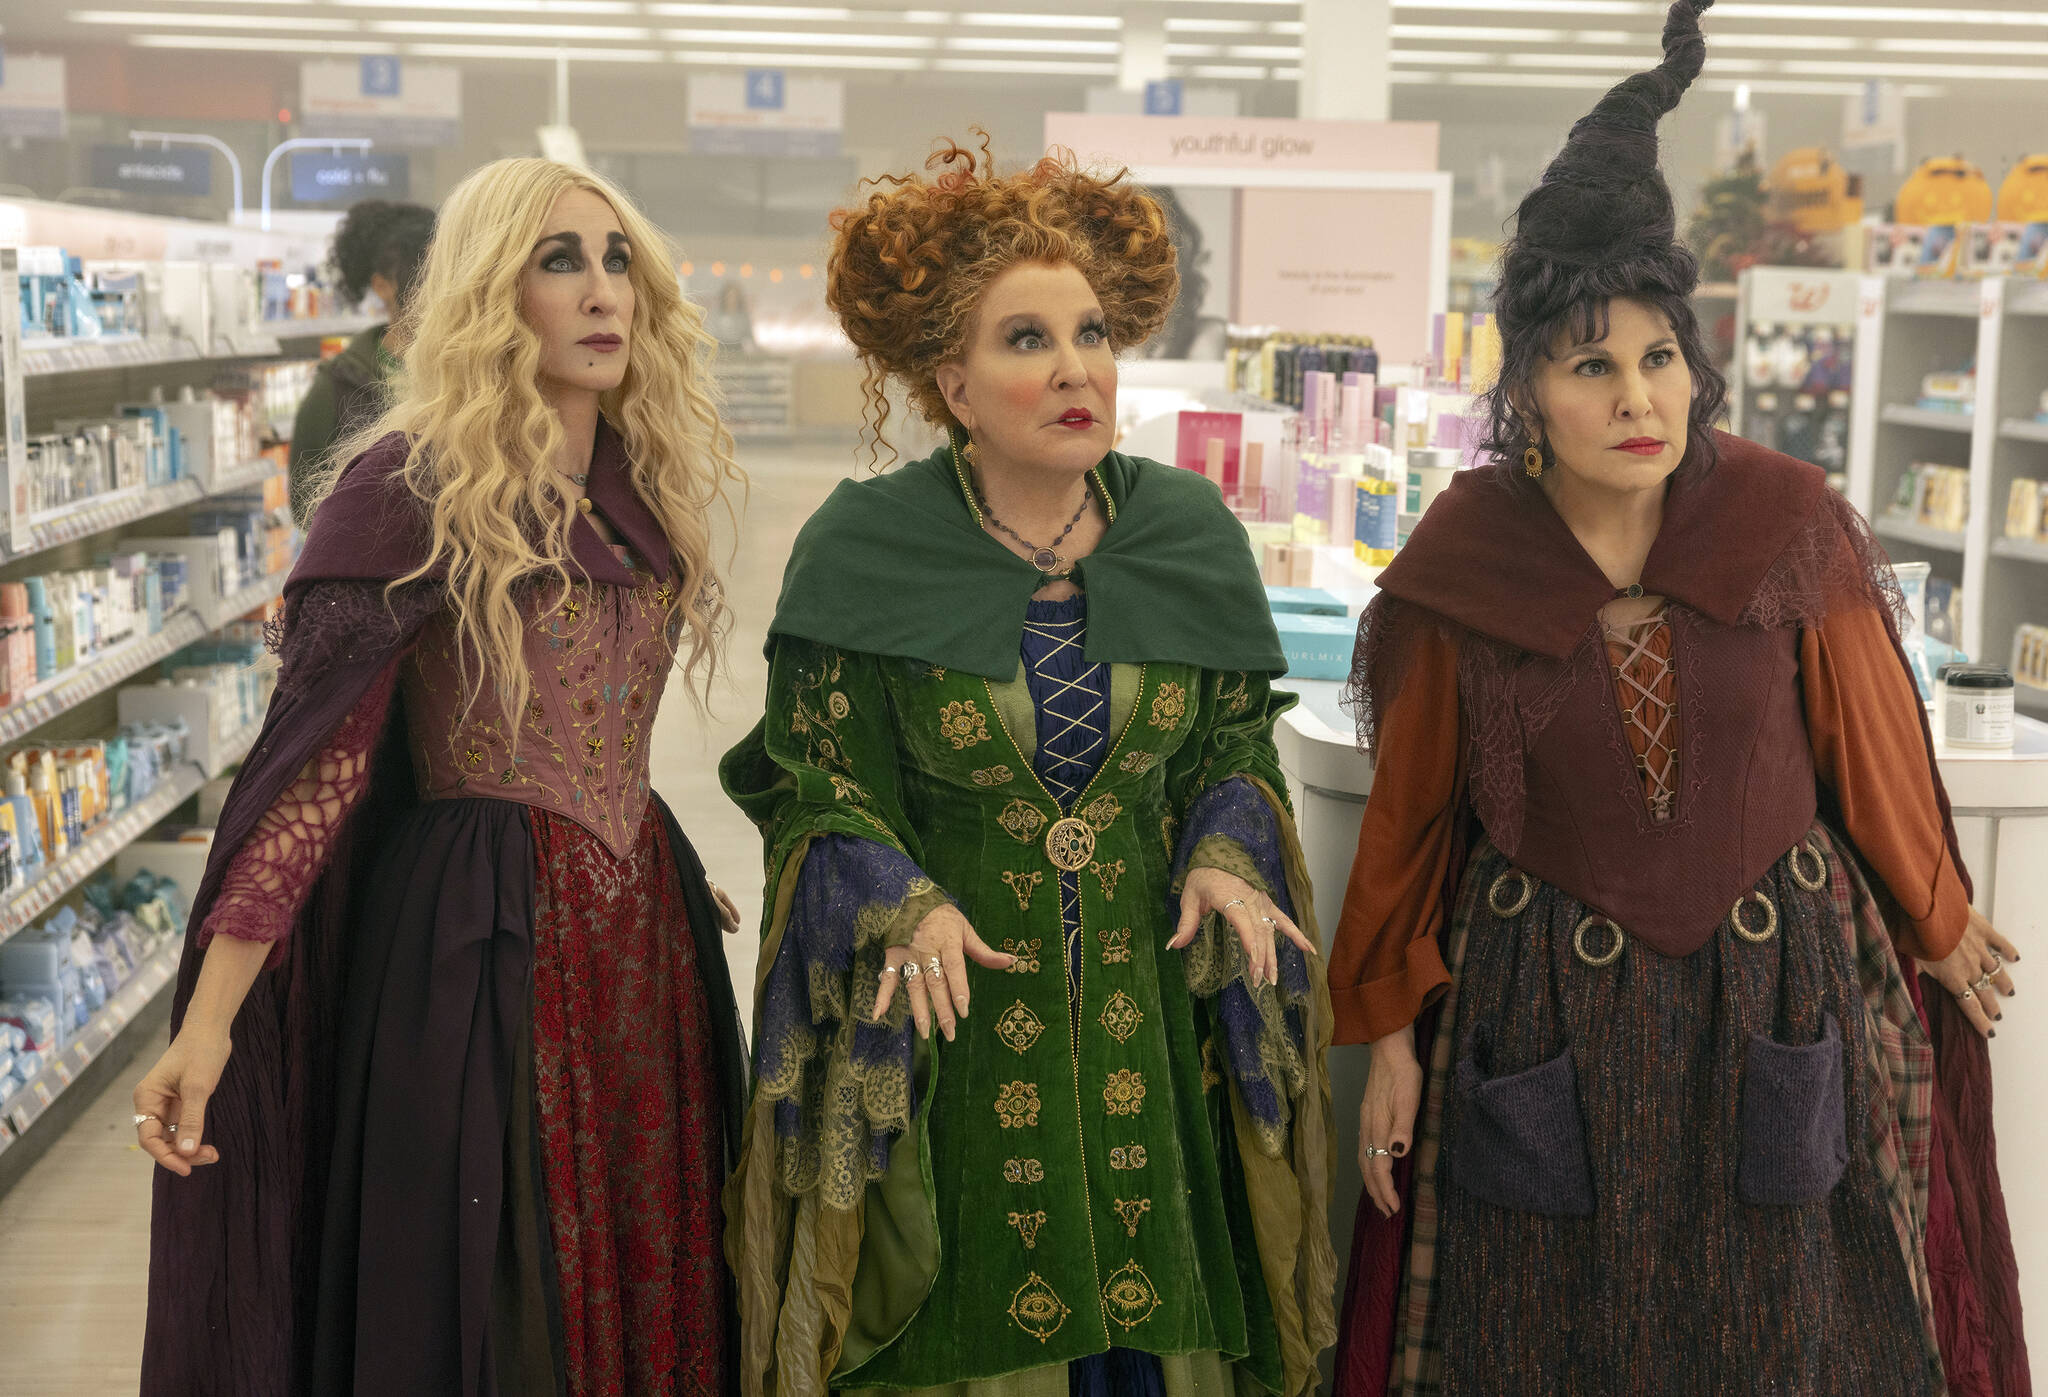 This image released by Disney shows, from left, Sarah Jessica Parker as Sarah Sanderson, Bette Midler as Winifred Sanderson, and Kathy Najimy as Mary Sanderson in “Hocus Pocus 2.” (Matt Kennedy/Disney via AP)